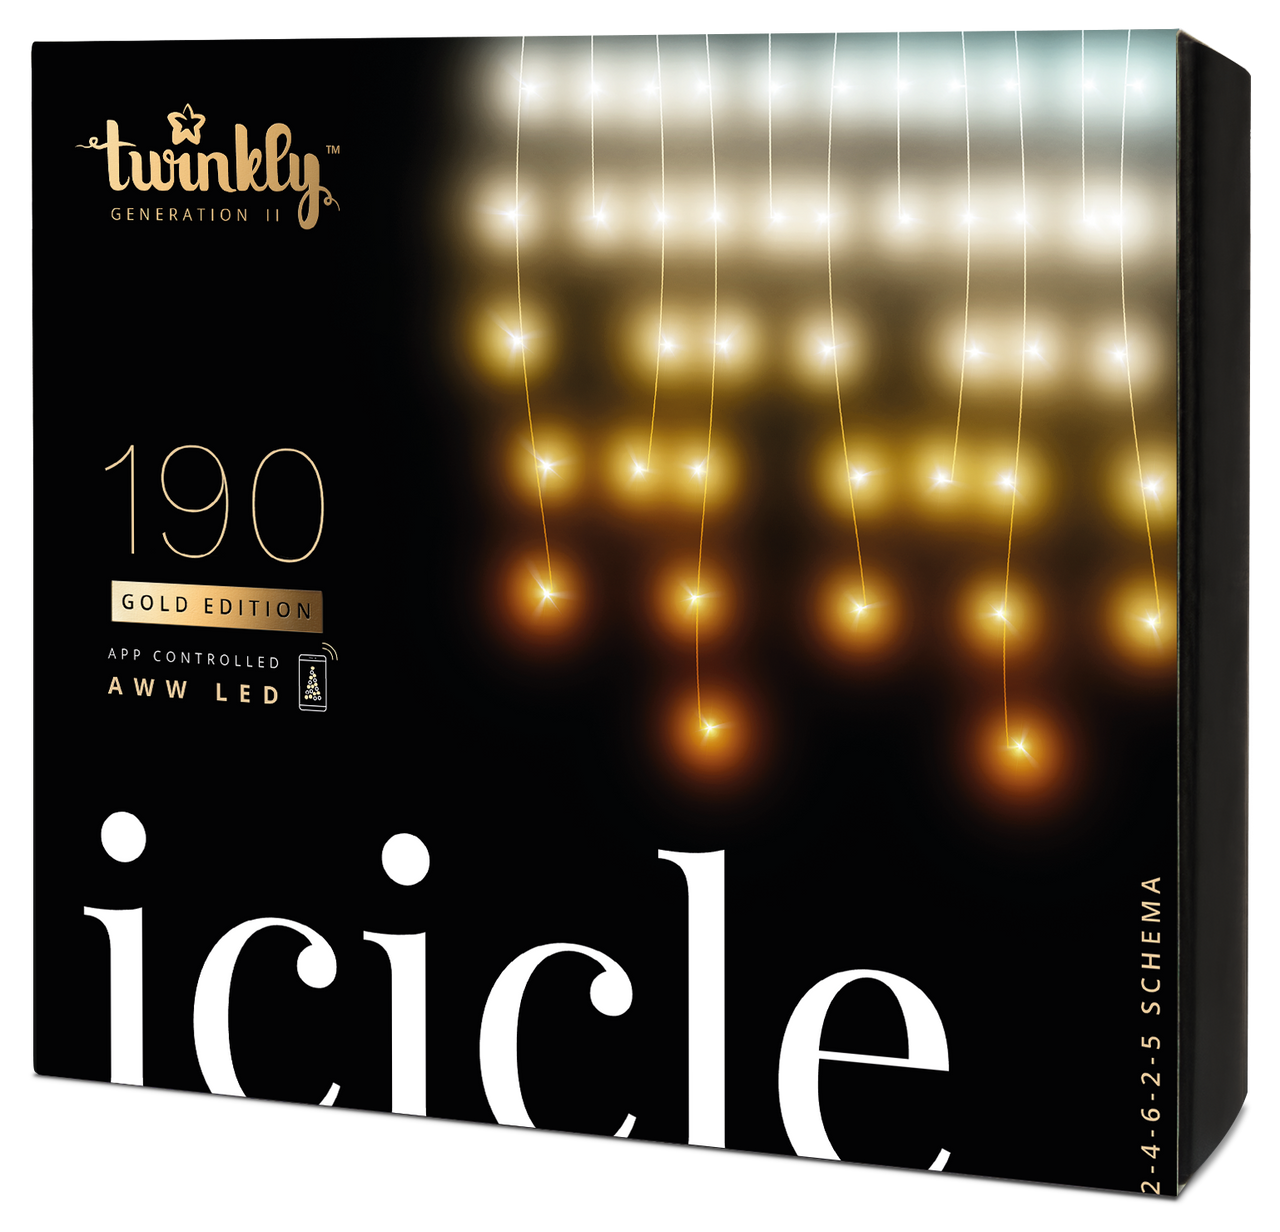 5m 190 LED Twinkly Smart App Controlled Icicle Lights Gold & Silver Edition